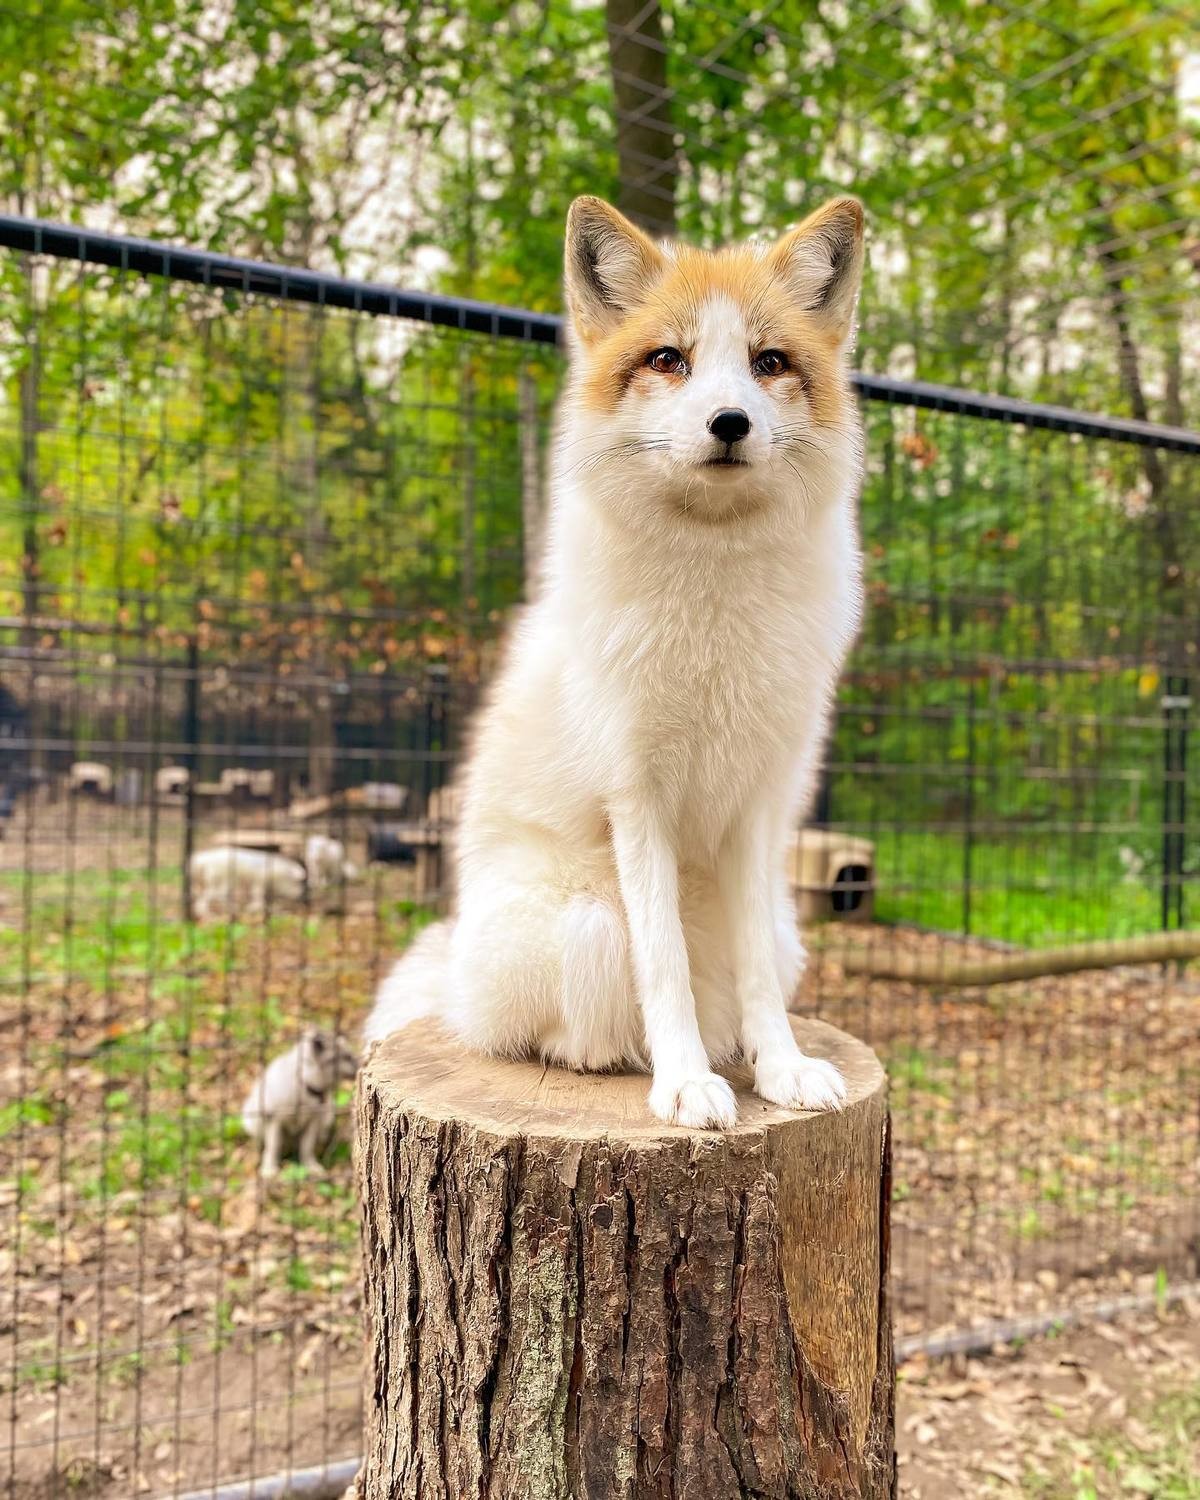 Loki the fox. join list: RescueCritters (53 subs)Mention History This is Loki, from Arctic Fox Daily Wildlife Rescue, don't let the sanctuary's name fool you, L